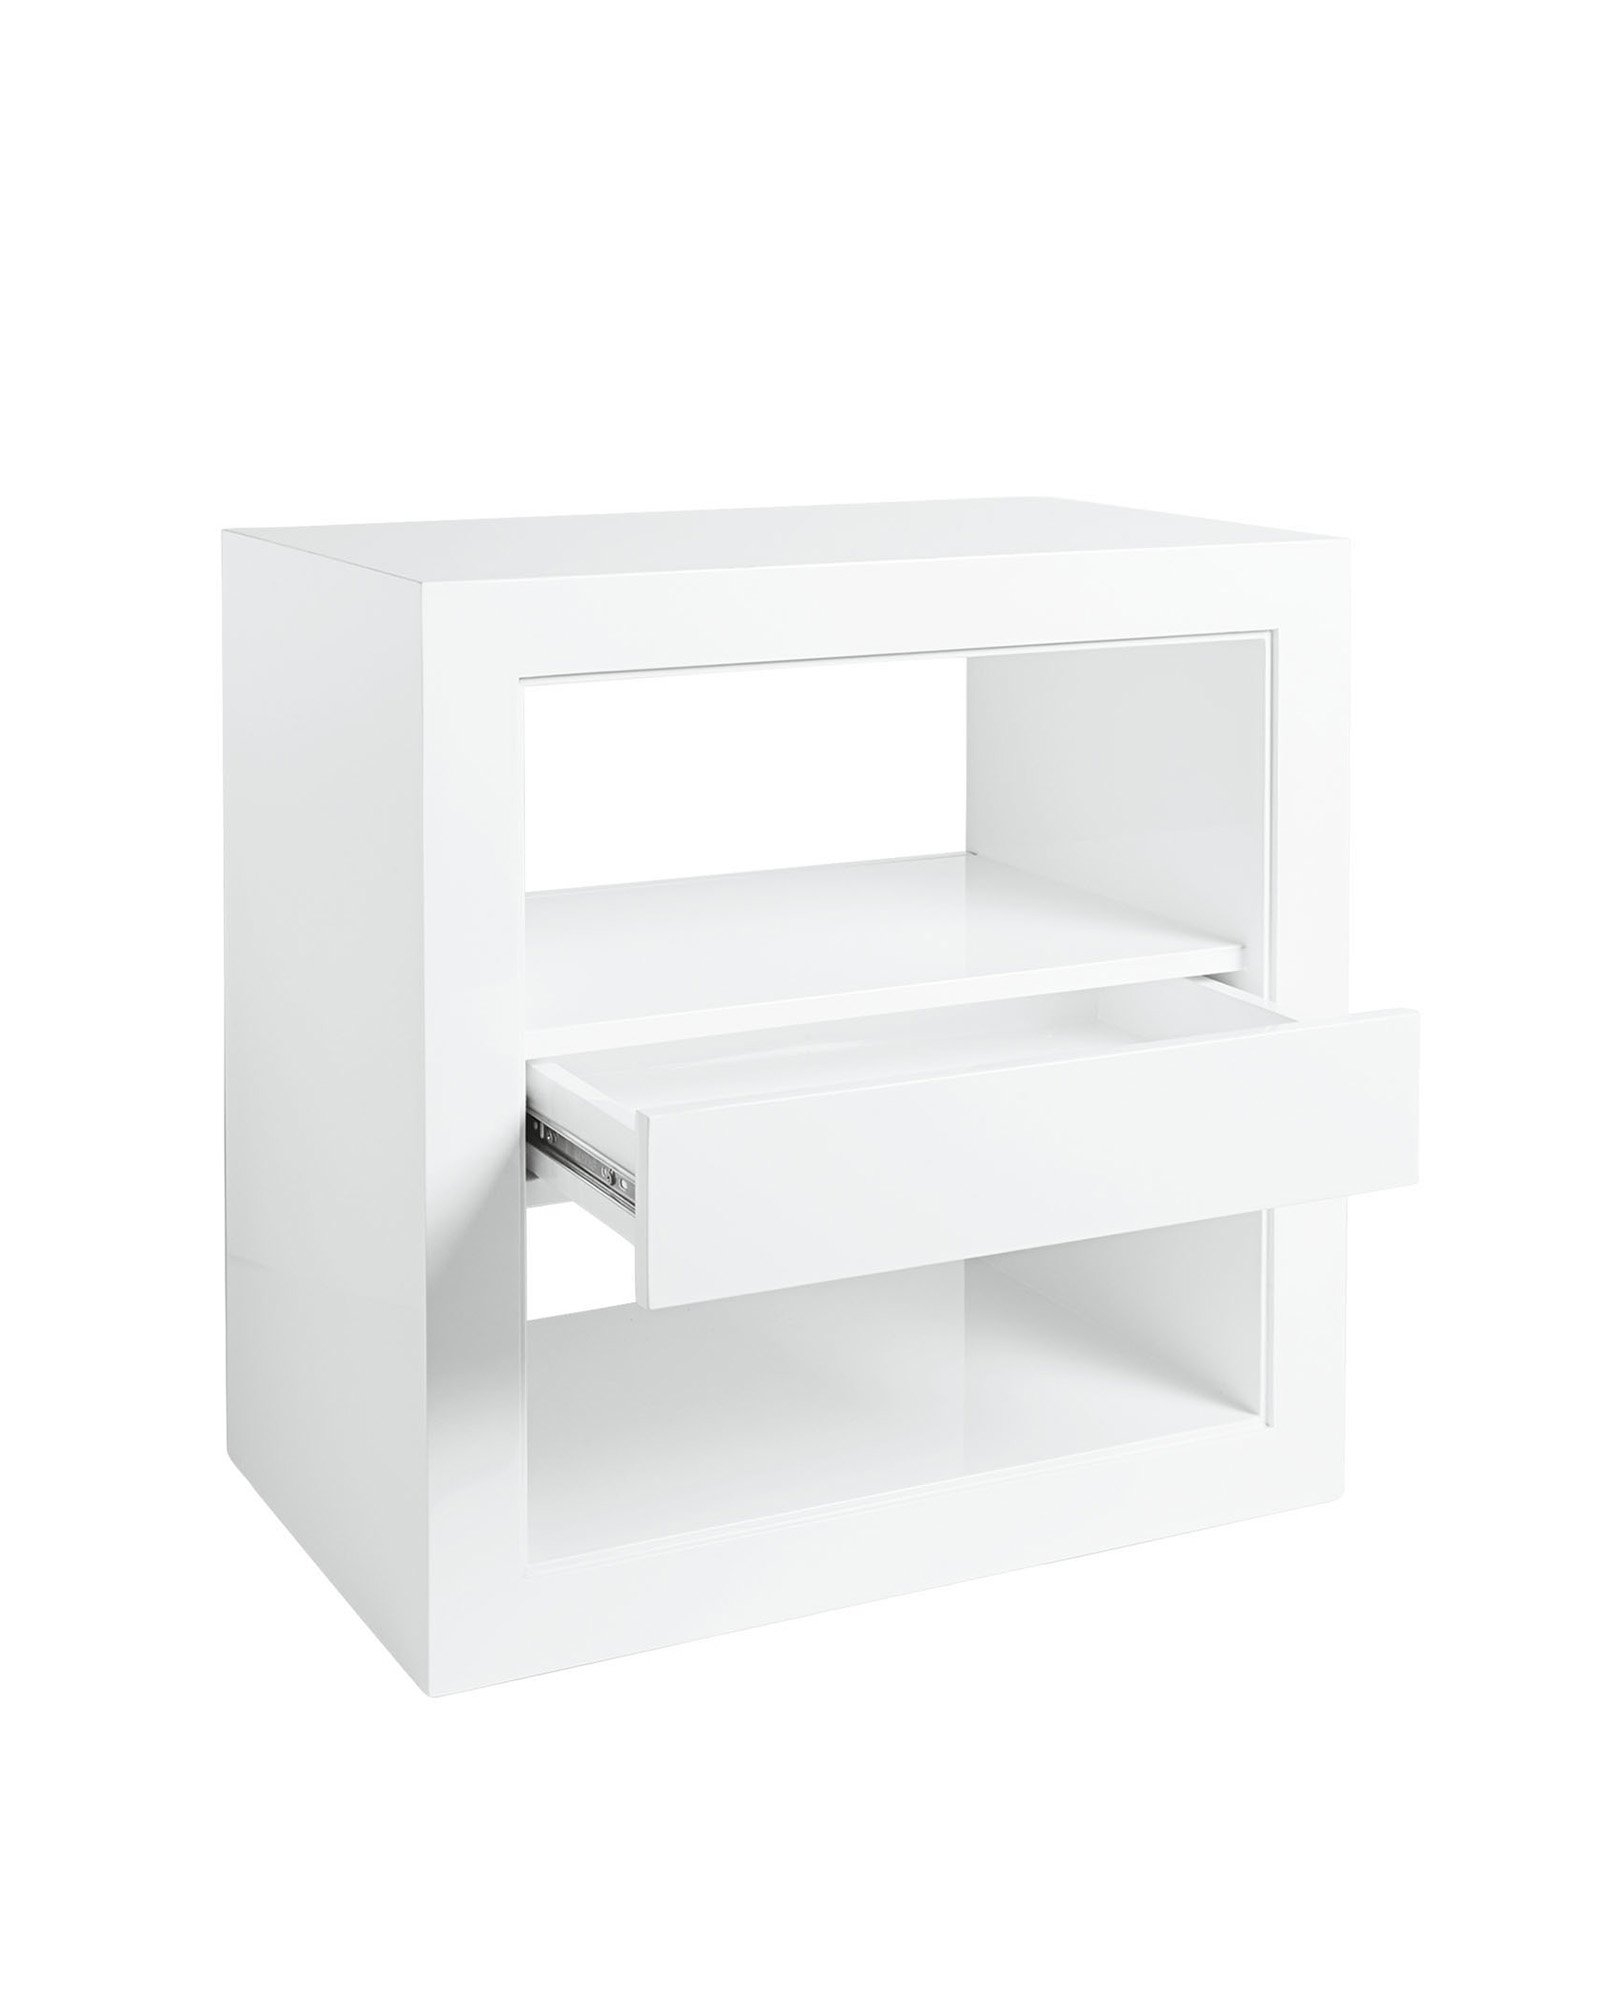 Atelier Side Table With Drawer - White - Image 2